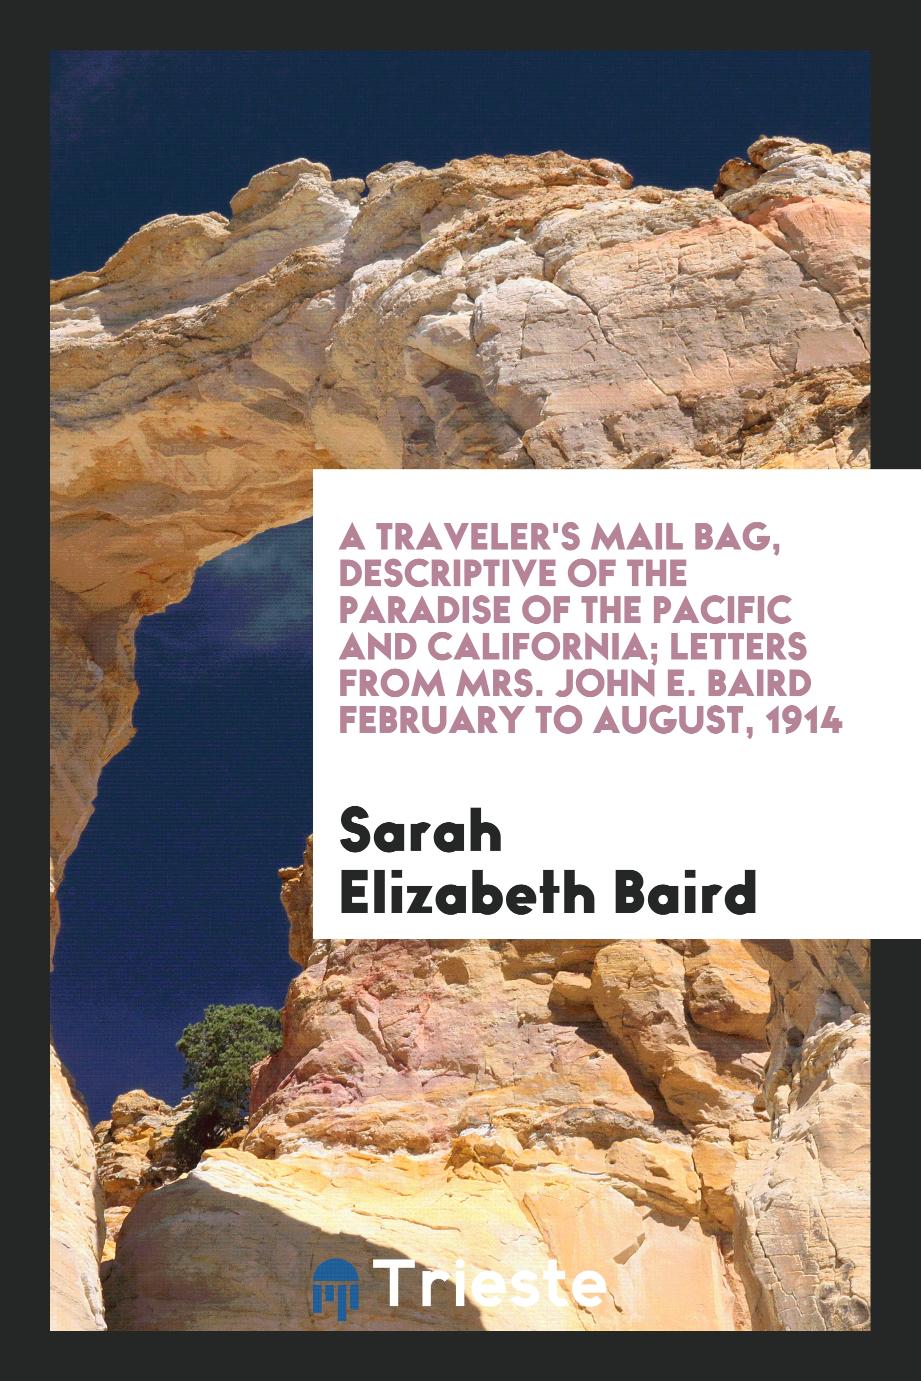 A Traveler's Mail Bag, Descriptive of the Paradise of the Pacific and California; Letters from Mrs. John E. Baird February to August, 1914